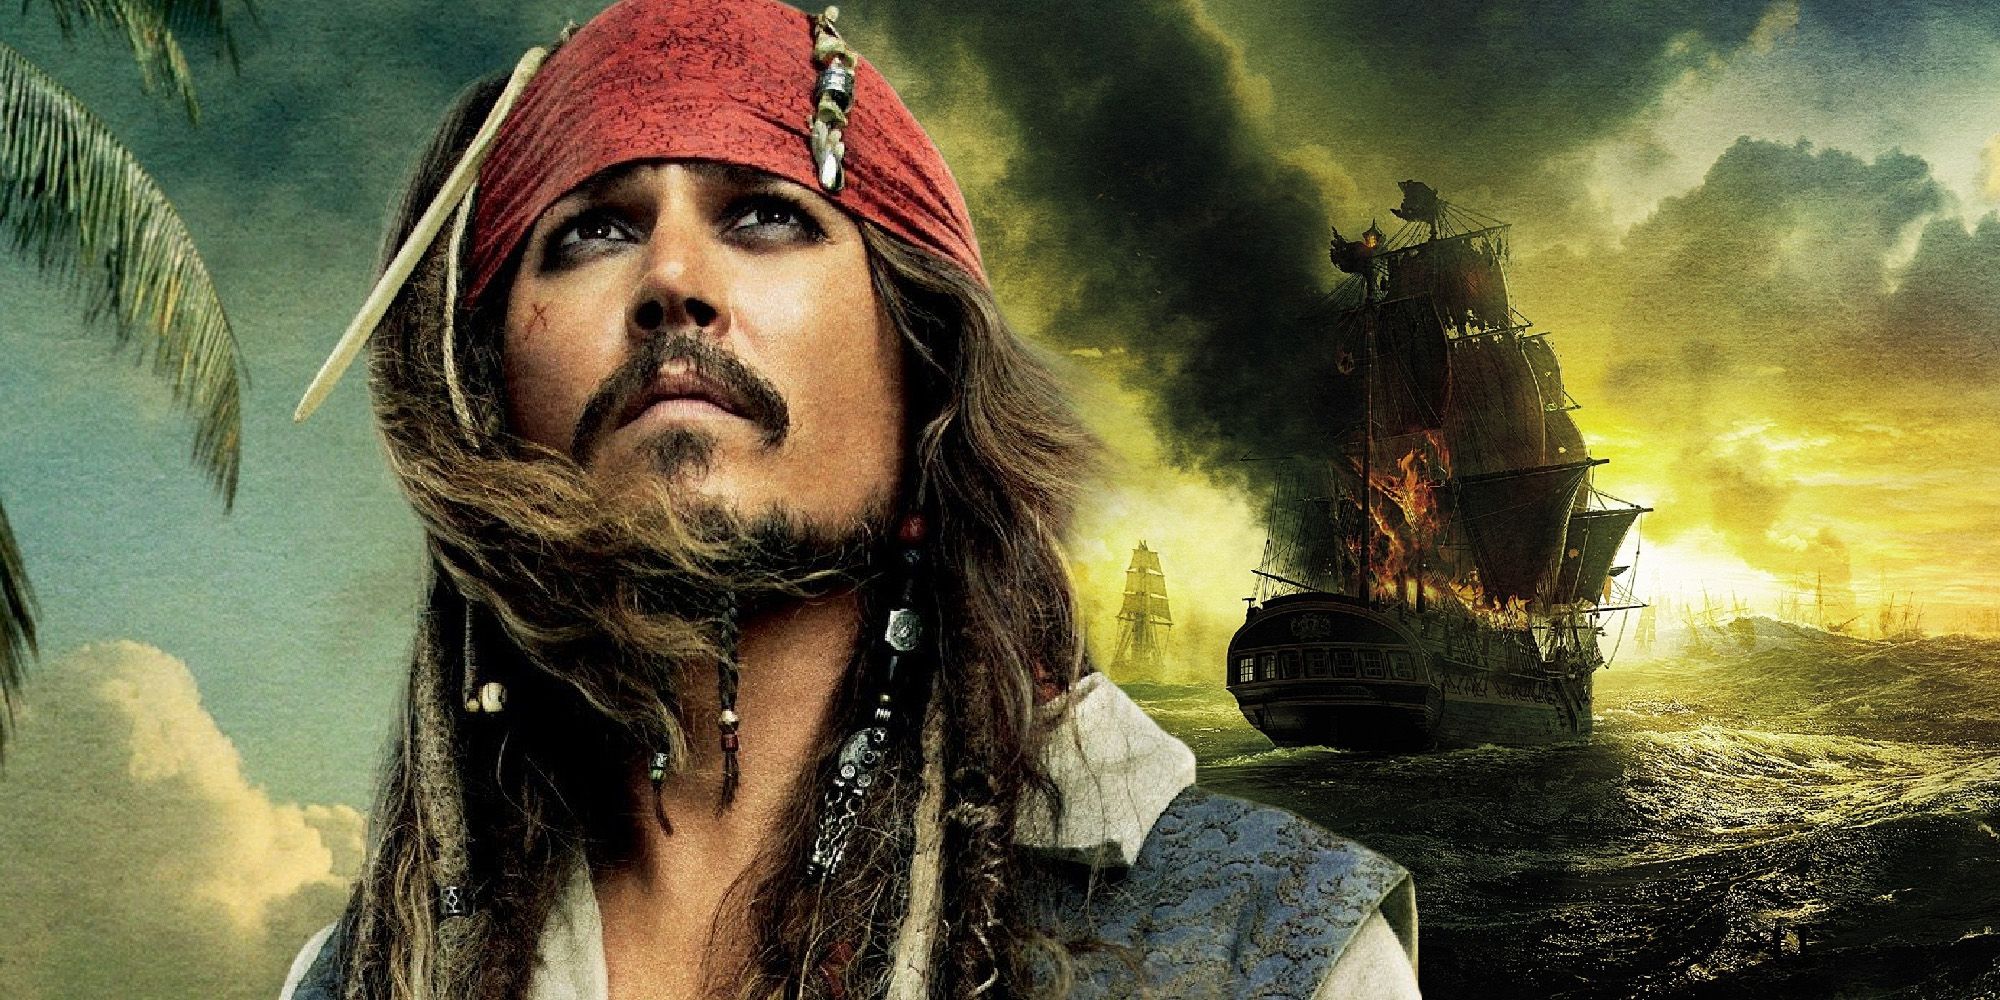 Why Pirates of the Caribbean Succeeded Where Cutthroat Island Failed